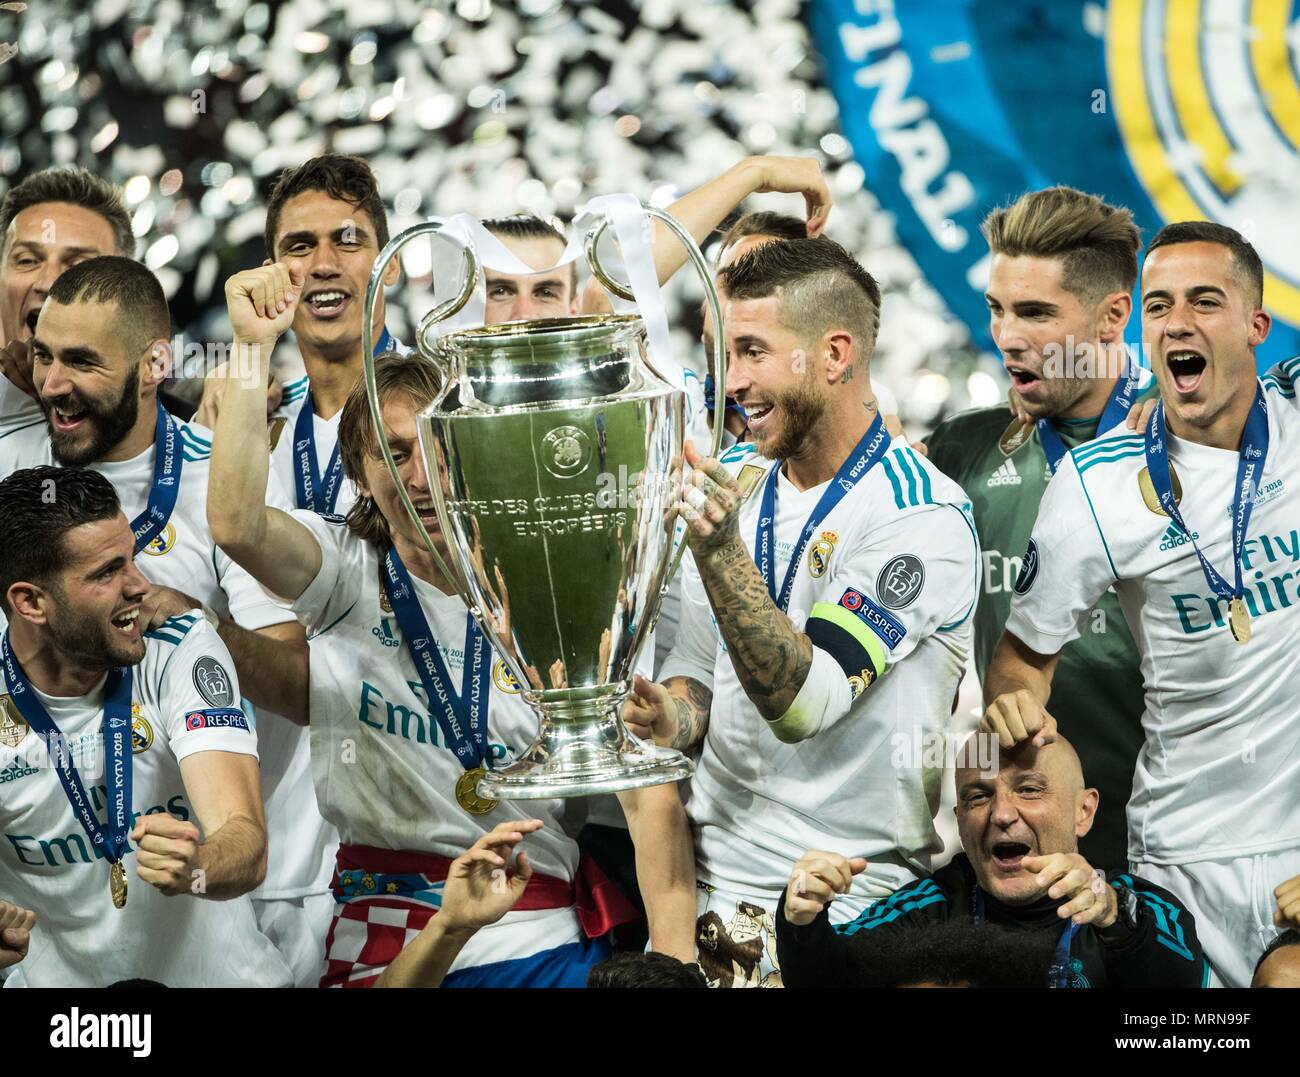 Sergio Ramos on life in Paris, facing Bayern, Champions League ambitions  and retirement plans, UEFA Champions League